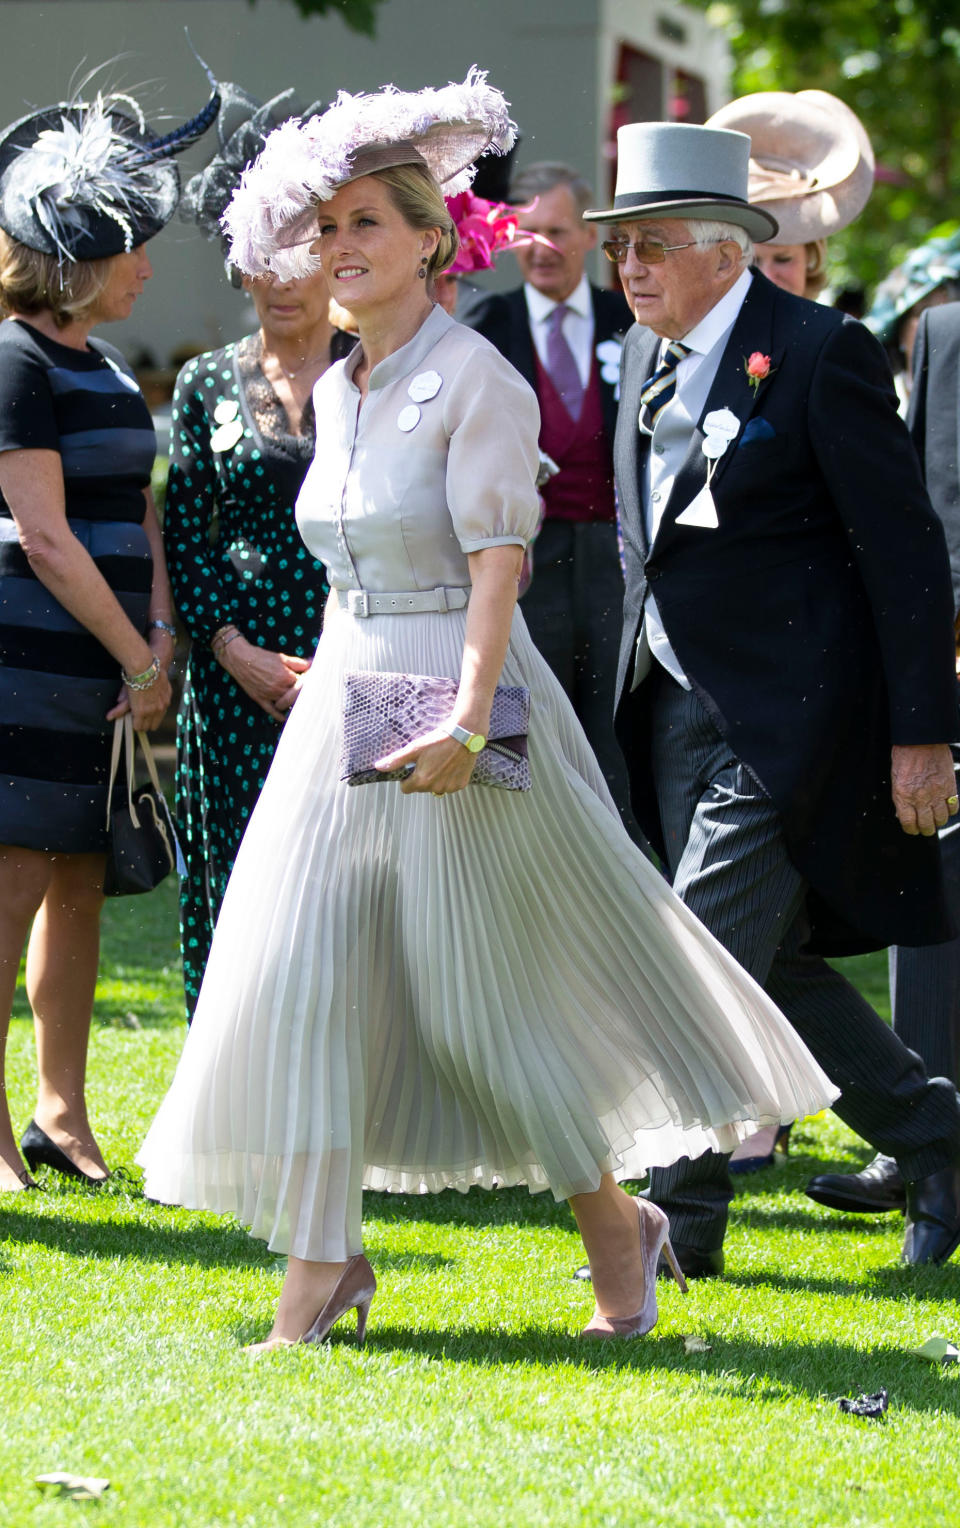 Sophie, Countess of Wessex on day 3 of Royal Ascot 2018